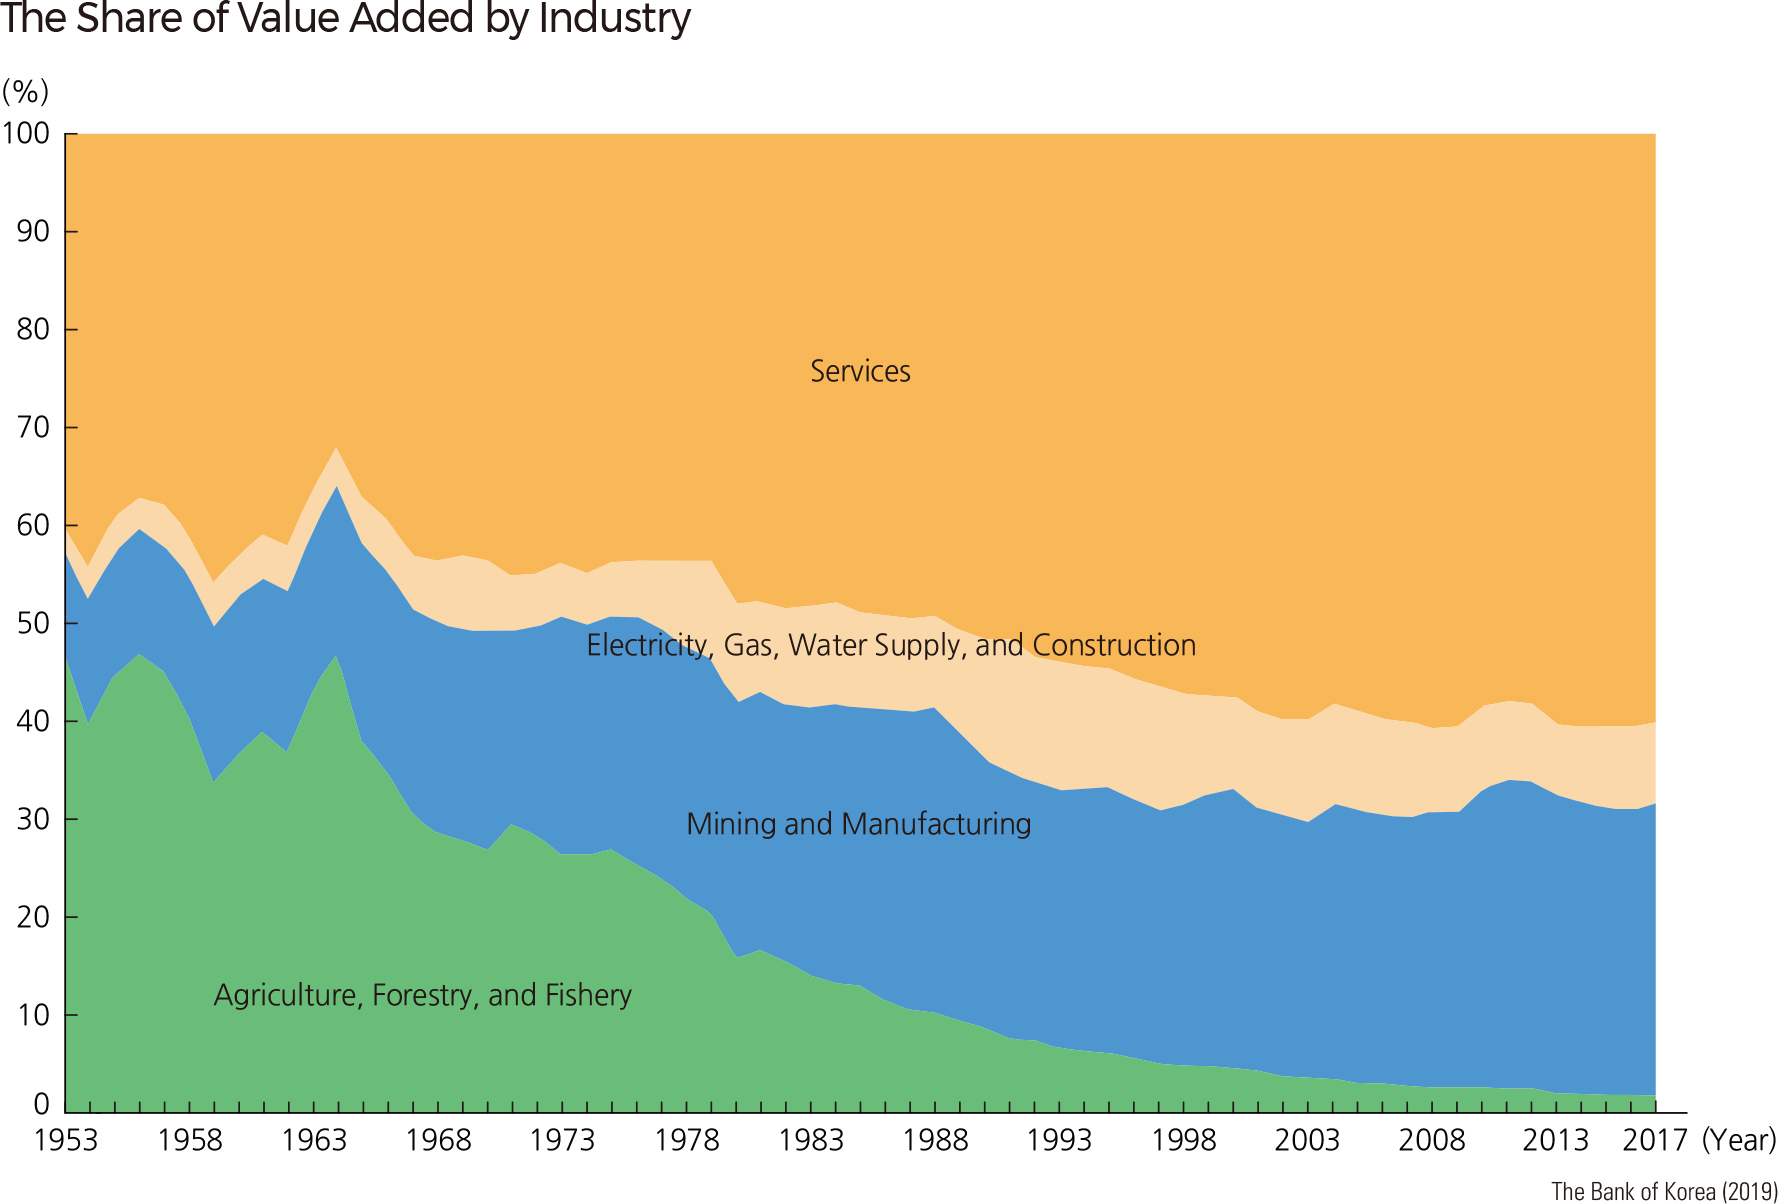 The Share of Value Added by Industry